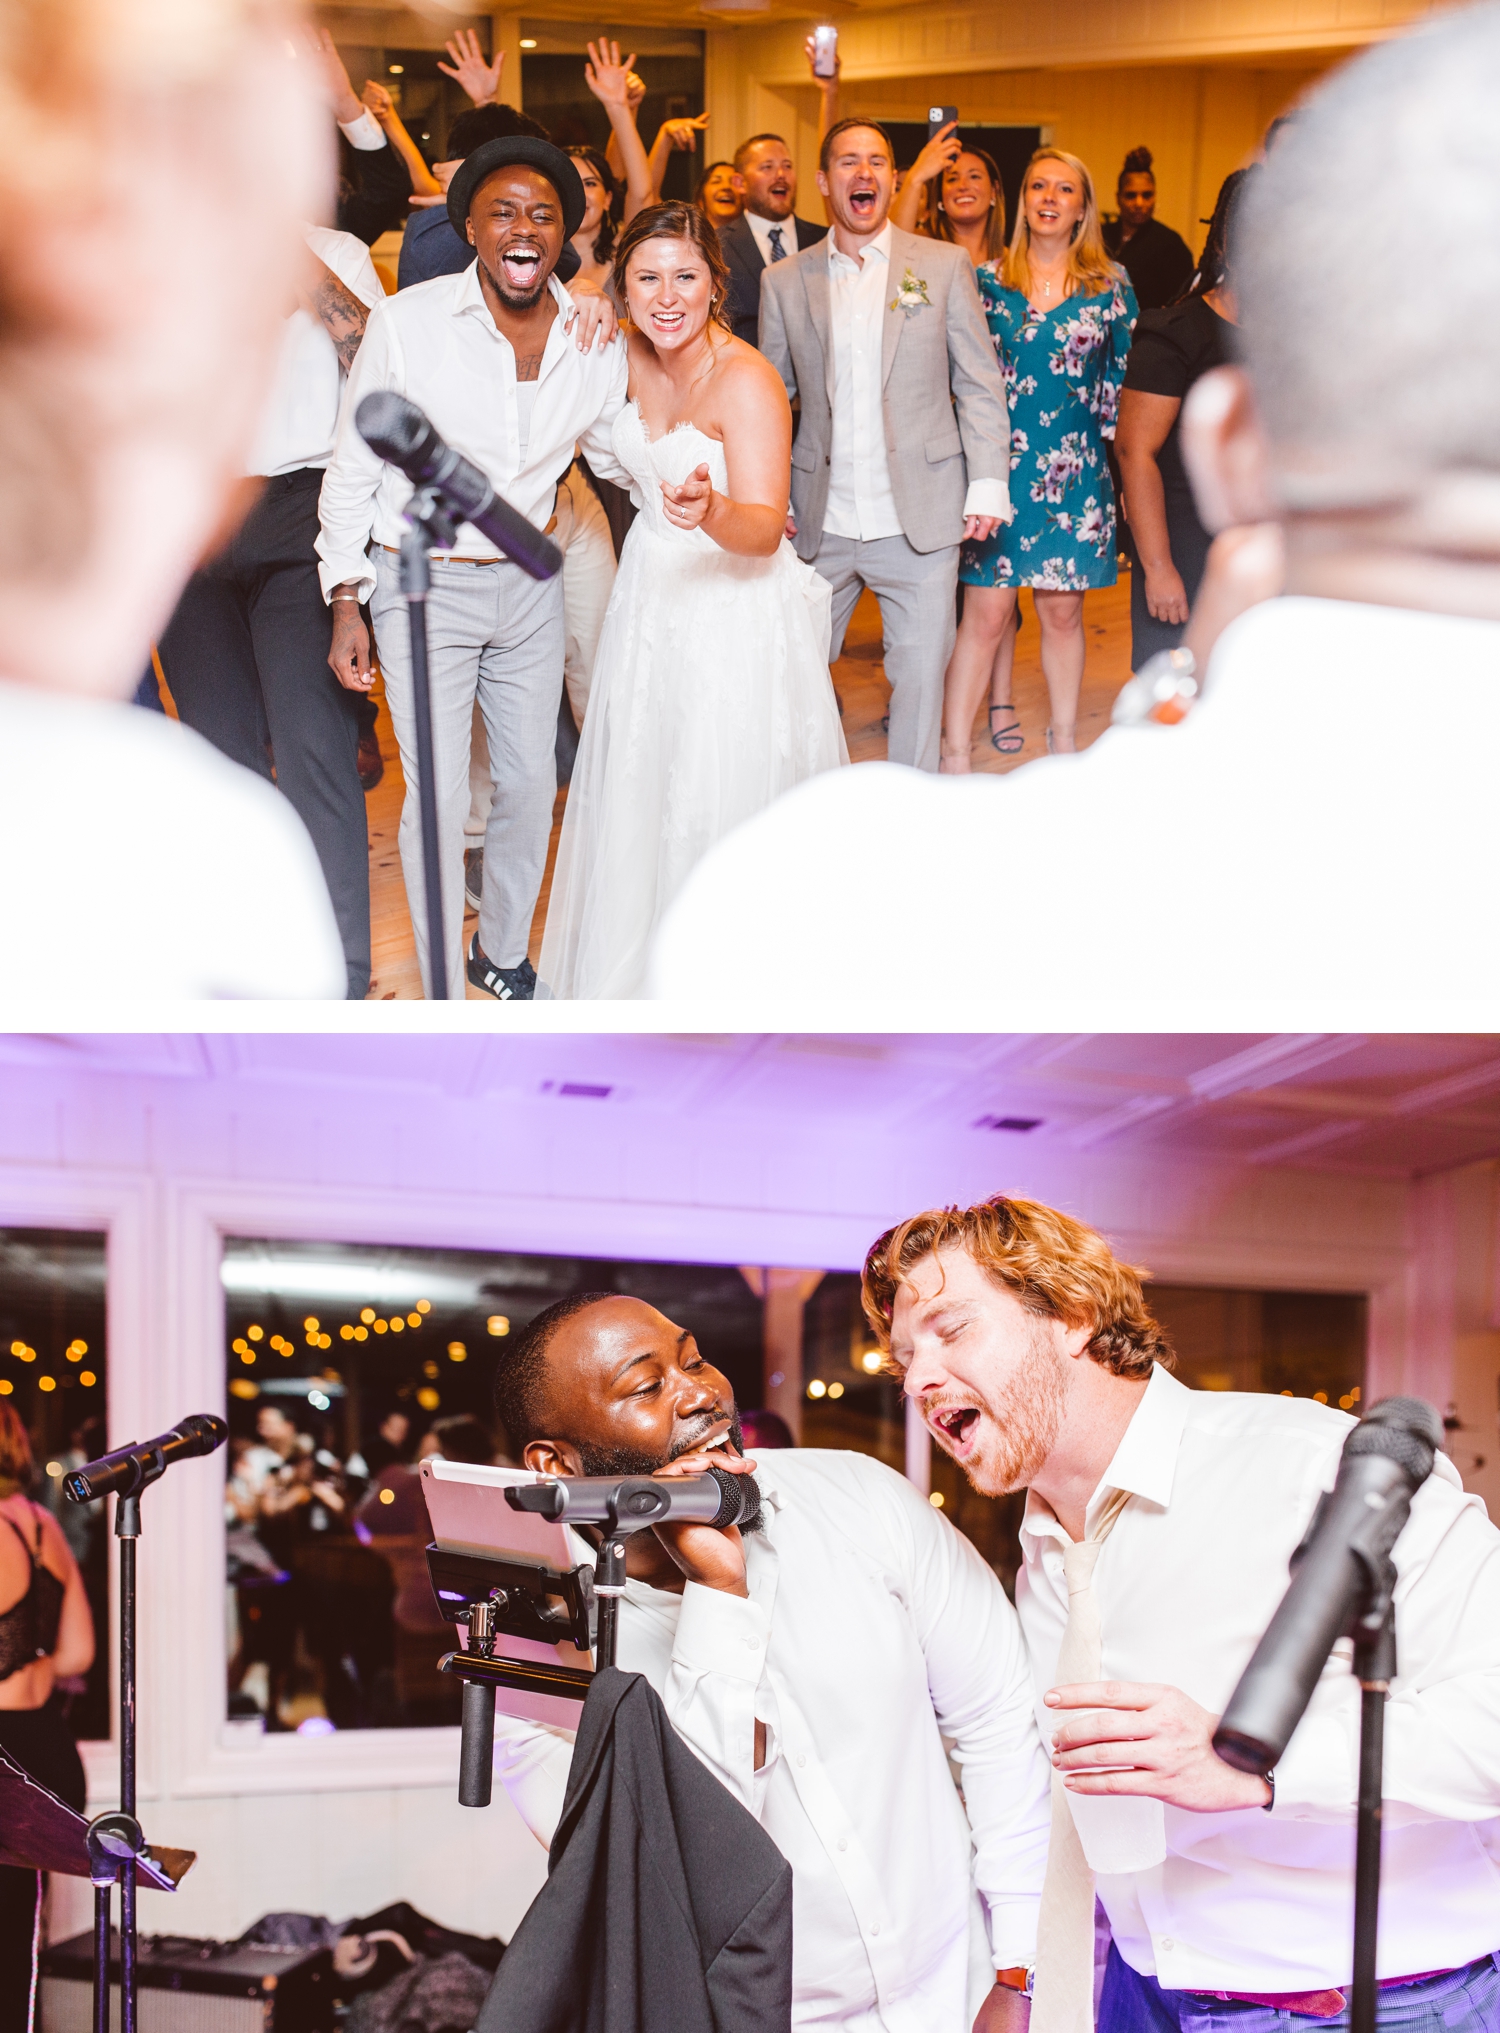 Bride and guests reacting to groom singing at wedding reception | groom singing at wedding reception at Wylder Hotel Tilghman Island | Brooke Michelle Photography